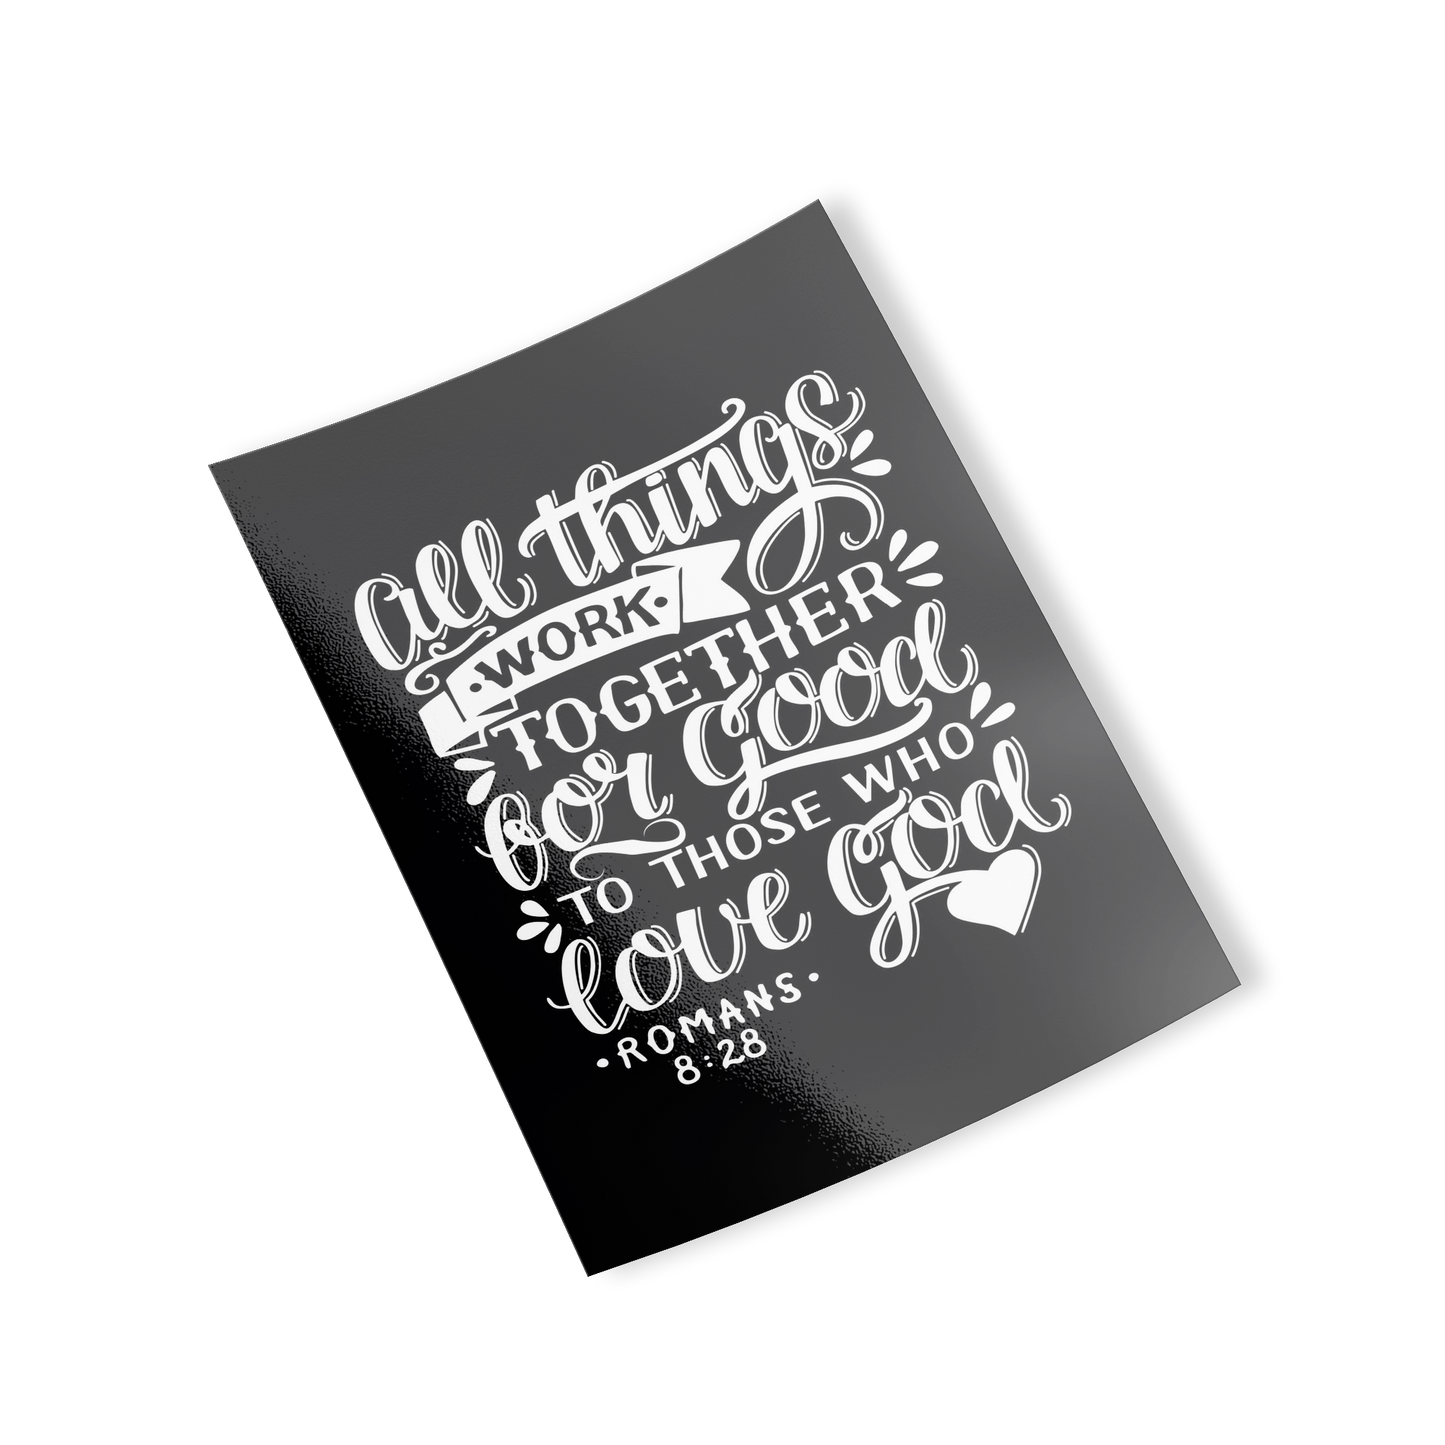 All Things Work Together For Good To Those Who Love God, Romans 8:28 - White on Black Rectangle Sticker diagonal